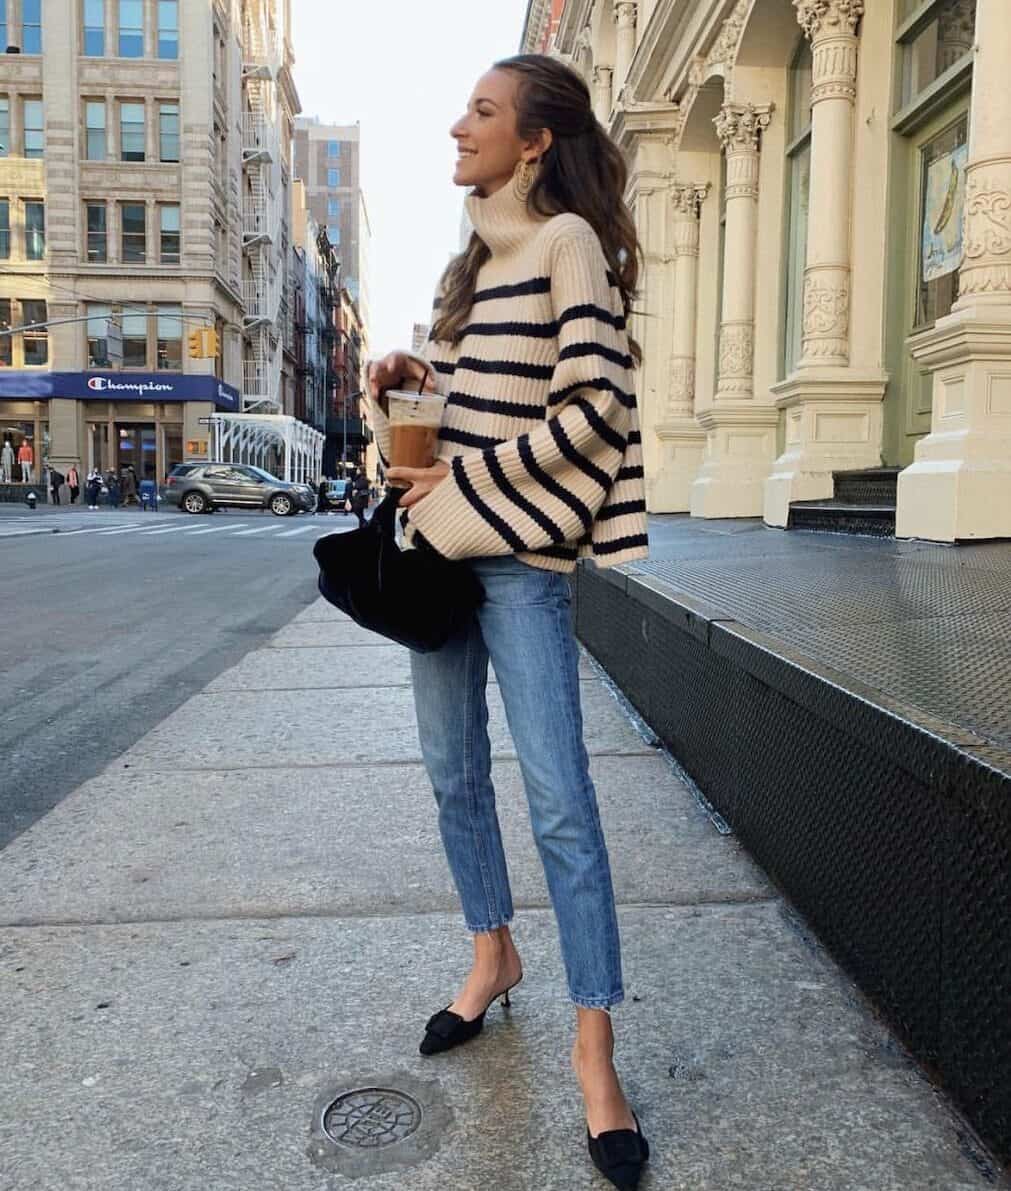 Woman wearing a black and cream stripped sweater, jeans, and black kitten heels drinks an iced coffee.